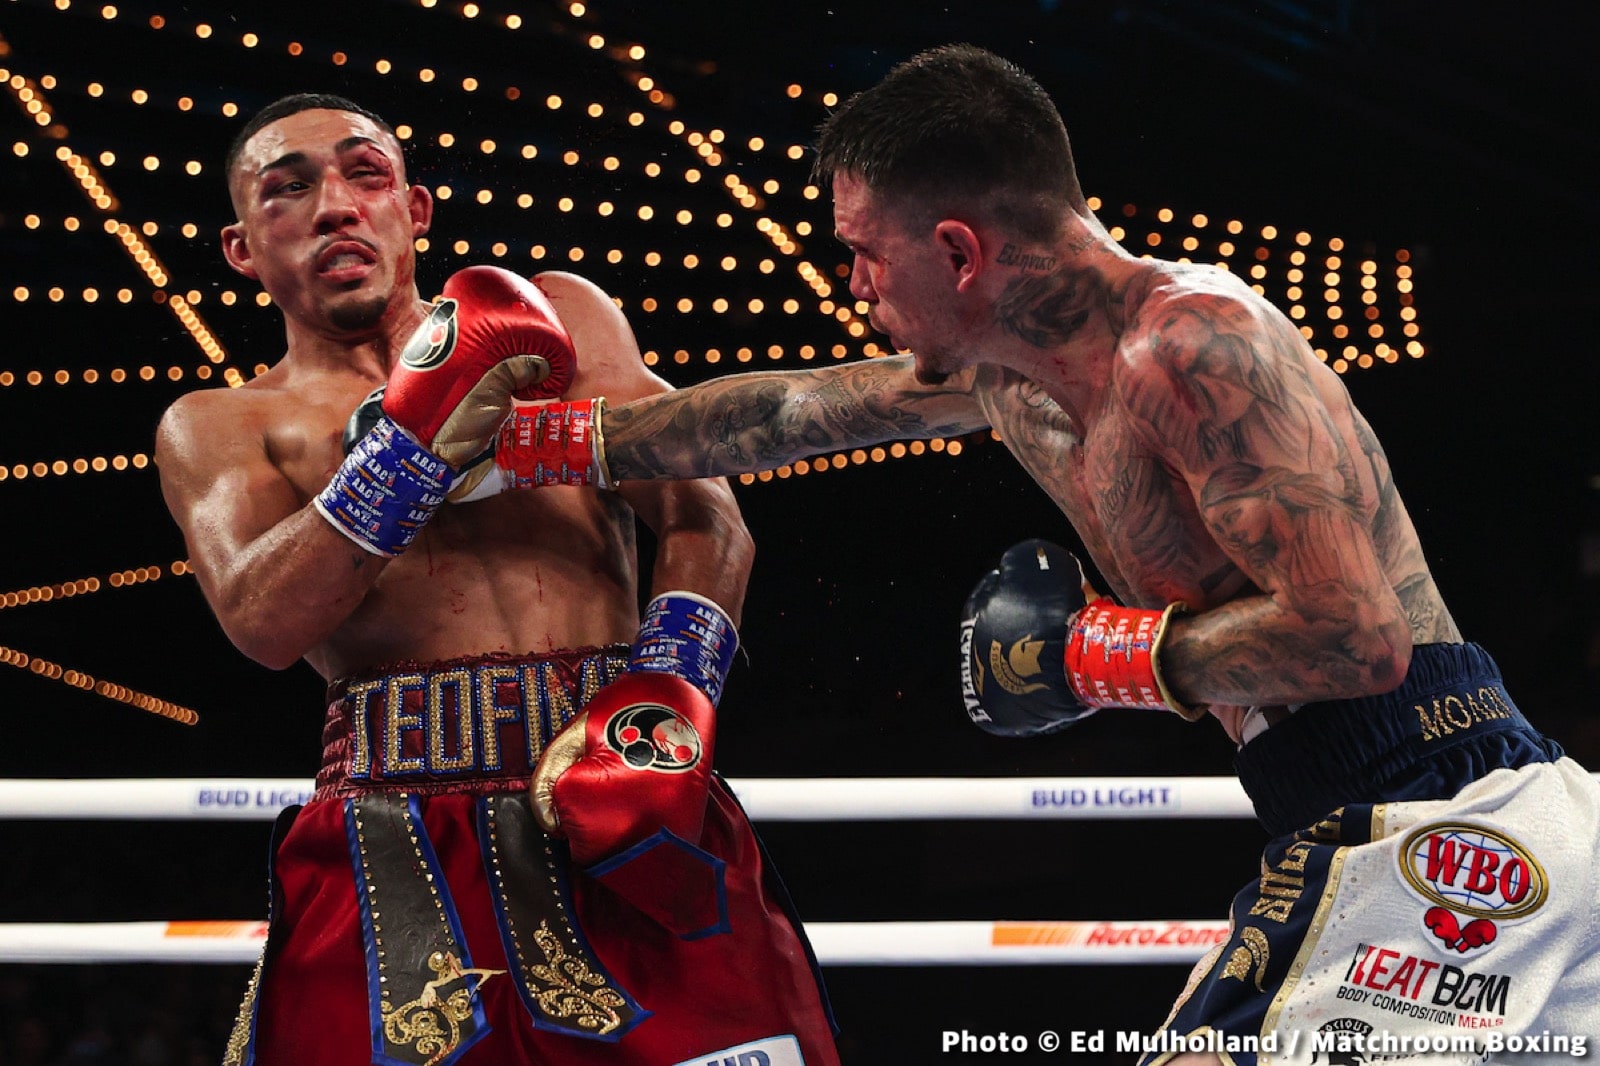 Image: "Everybody knows he won that fight" - says Teofimo Sr. on Lopez Jr's loss to George Kambosos